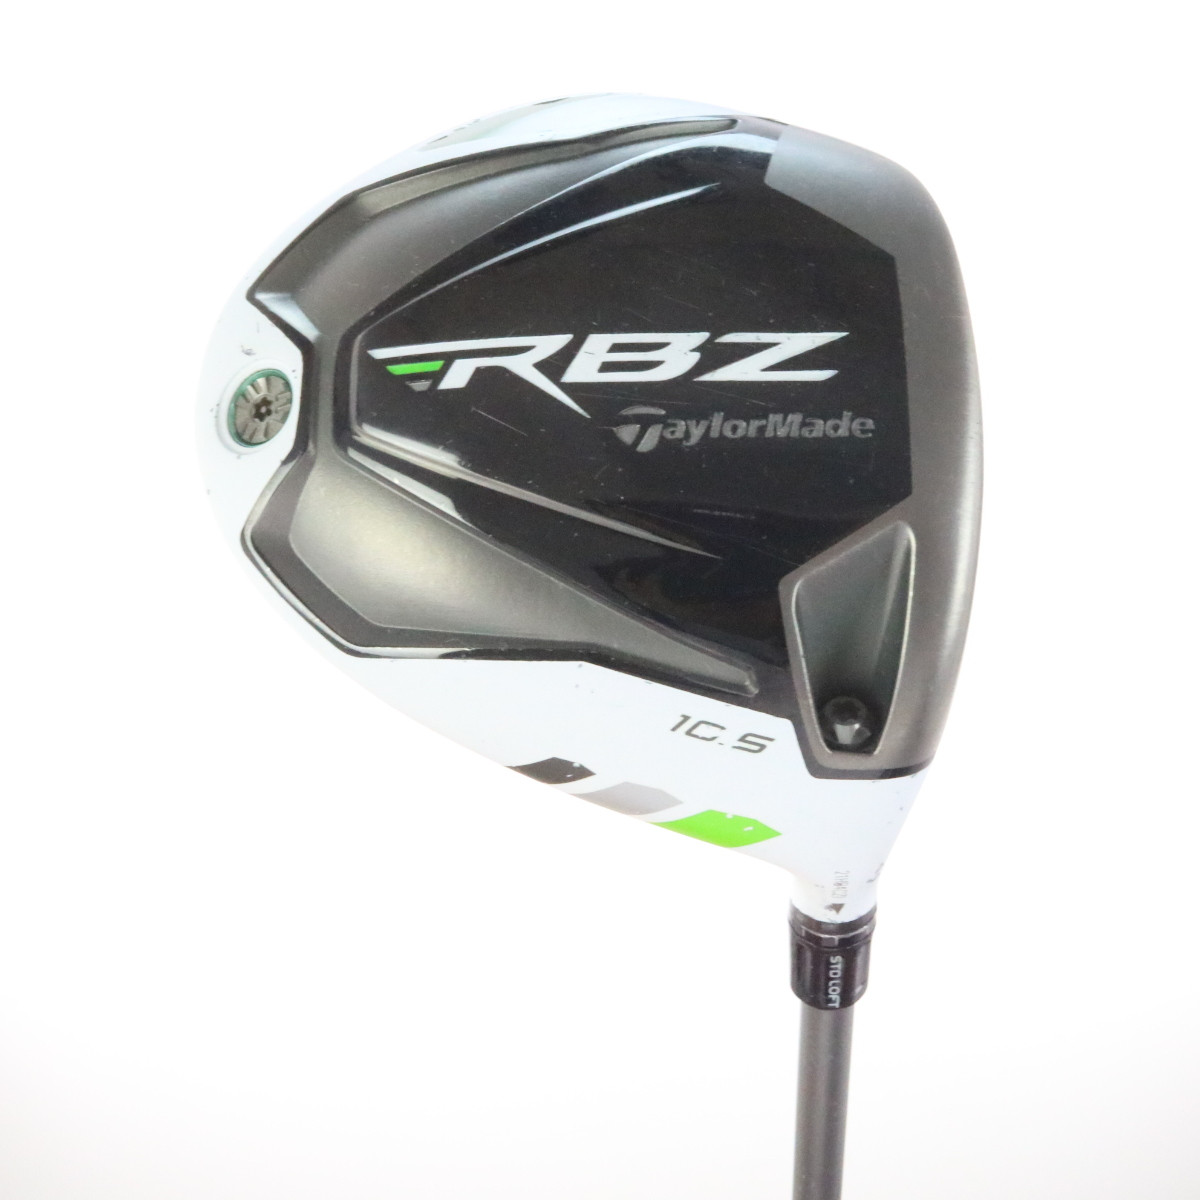 when did the taylormade rocketballz driver come out